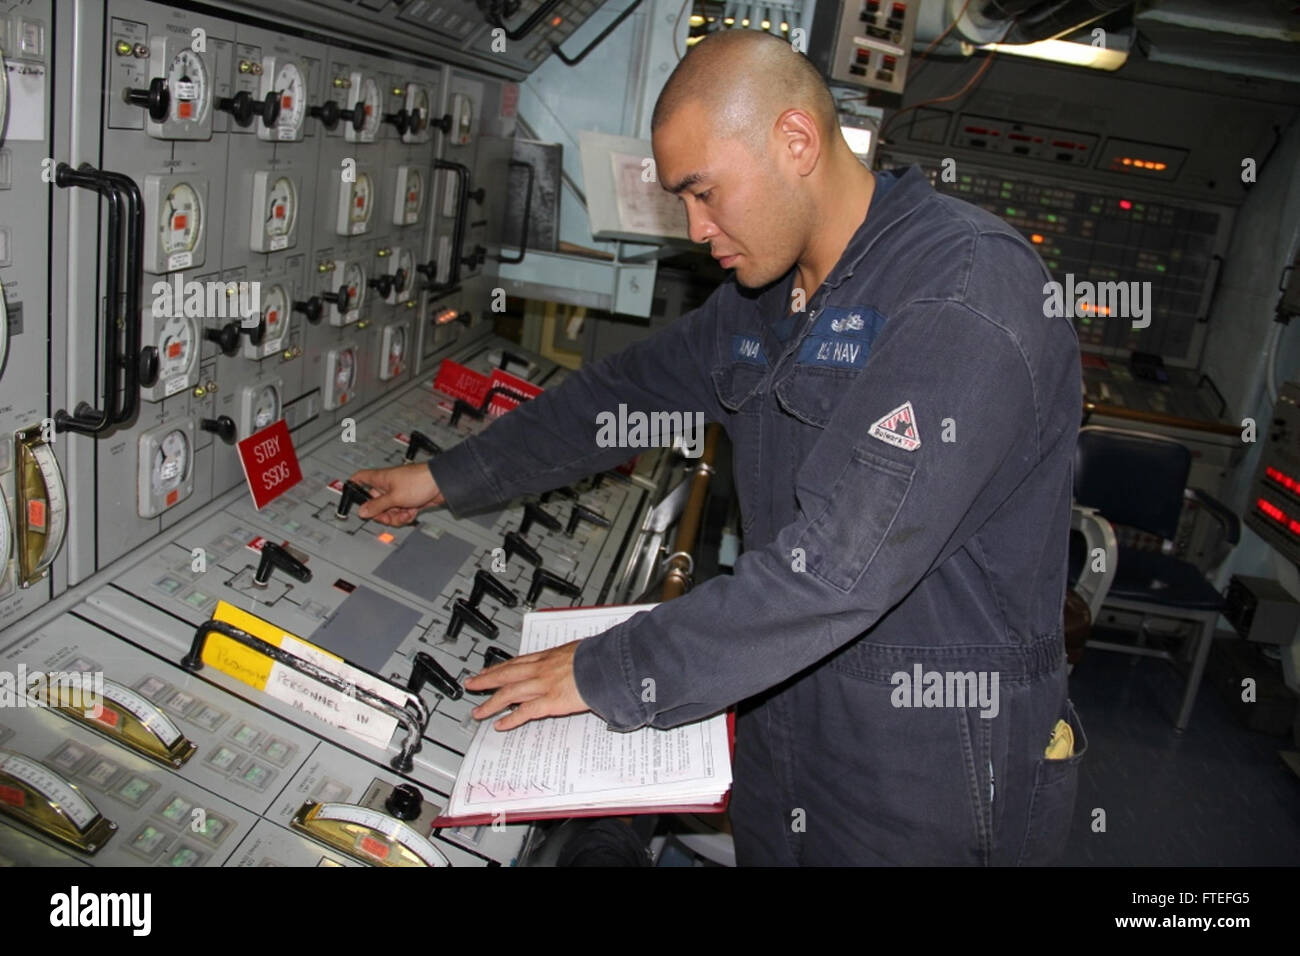 140729-N-KT328-009 MEDITERRANEAN SEA (July 29, 2014) Gas Turbine System Technician (Electrical) 2nd Class Joshua Gana goes  through the procedures to start one of the ship’s diesel generators aboard the guided-missile frigate USS Samuel B. Roberts (FFG-58). Samuel B. Roberts, homeported in Mayport, Fla., is conducting naval operations in the U.S. 6th Fleet area of operations in support of U.S. national security interests in Europe and Africa. (U.S. Navy photo by Ensign Evan Albright) Stock Photo